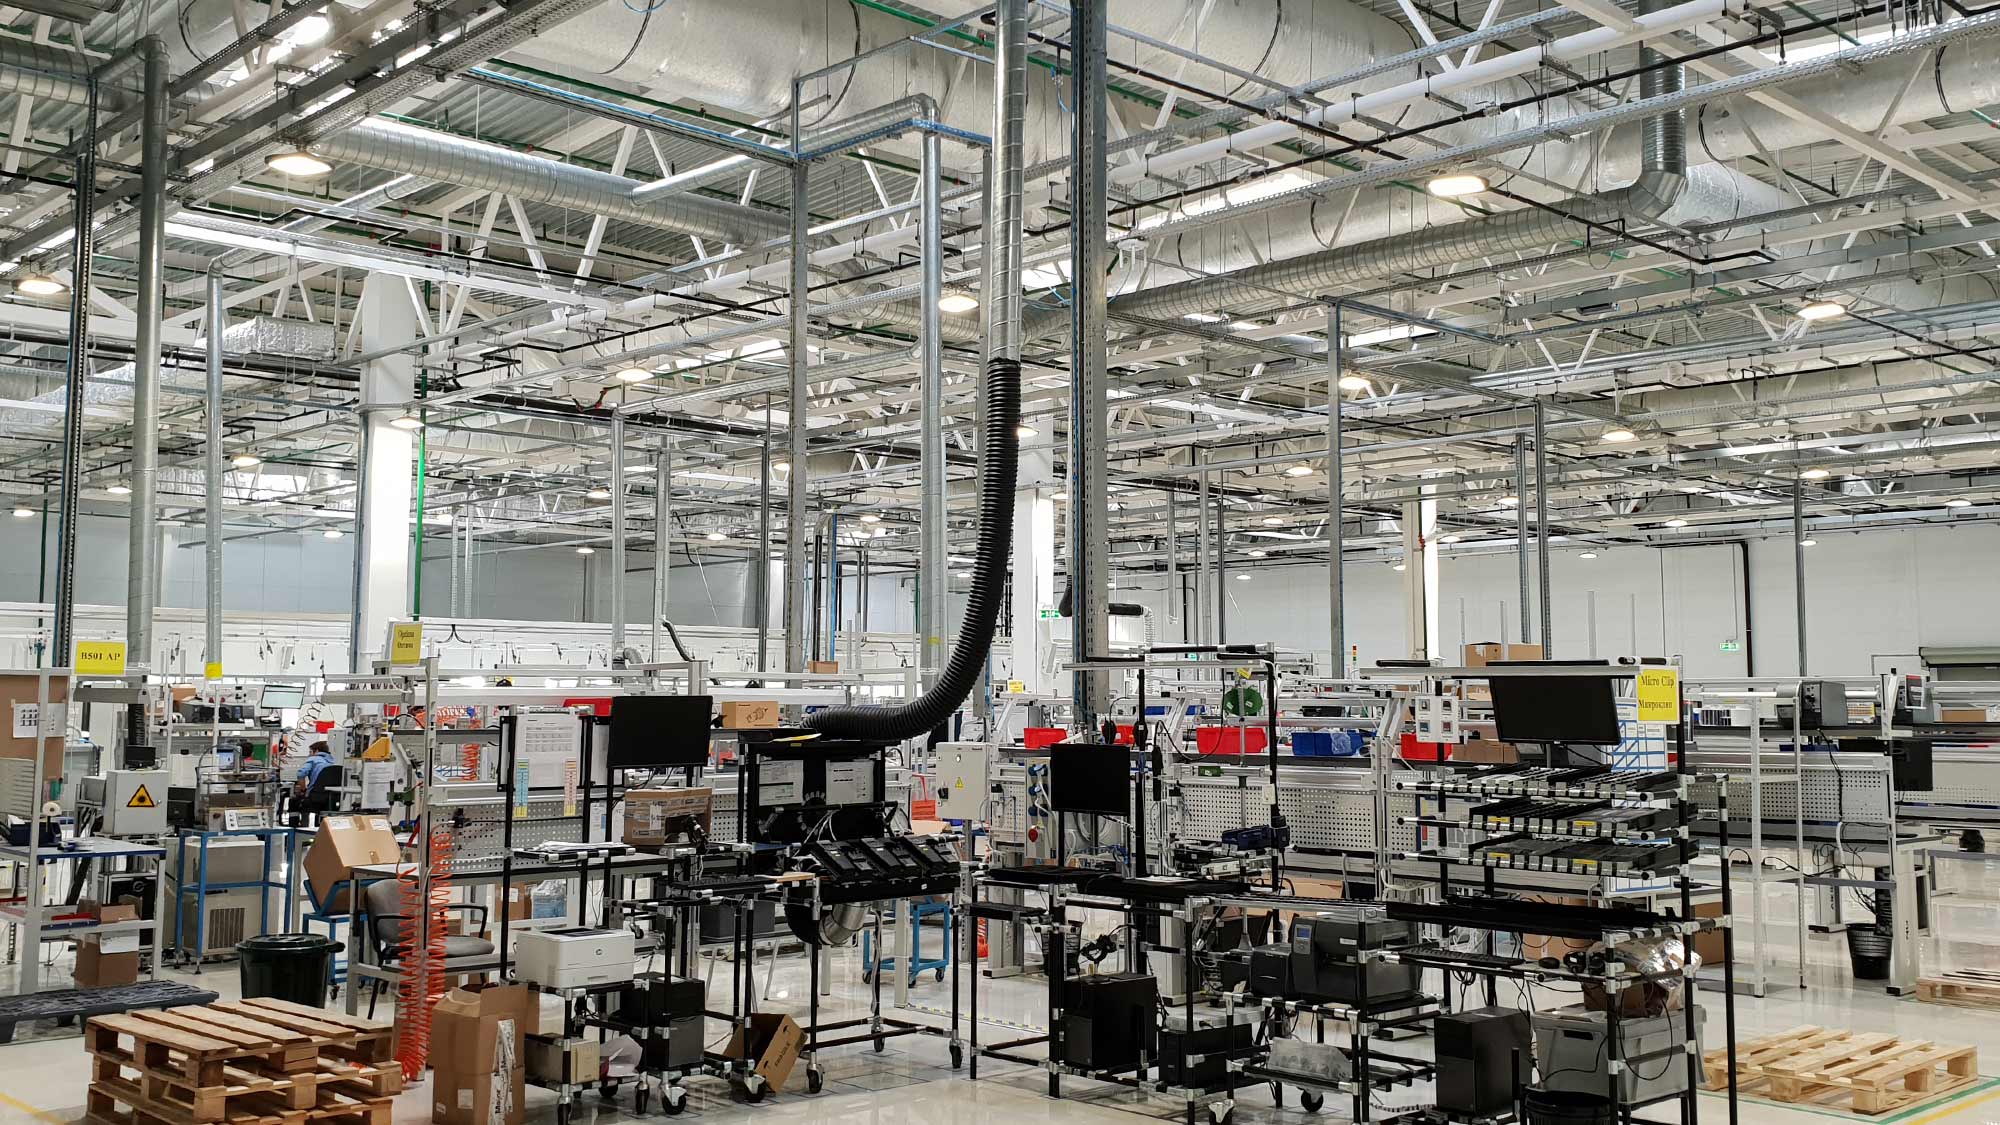 The inside of Honeywell's production plant in Lipetsk, Russia